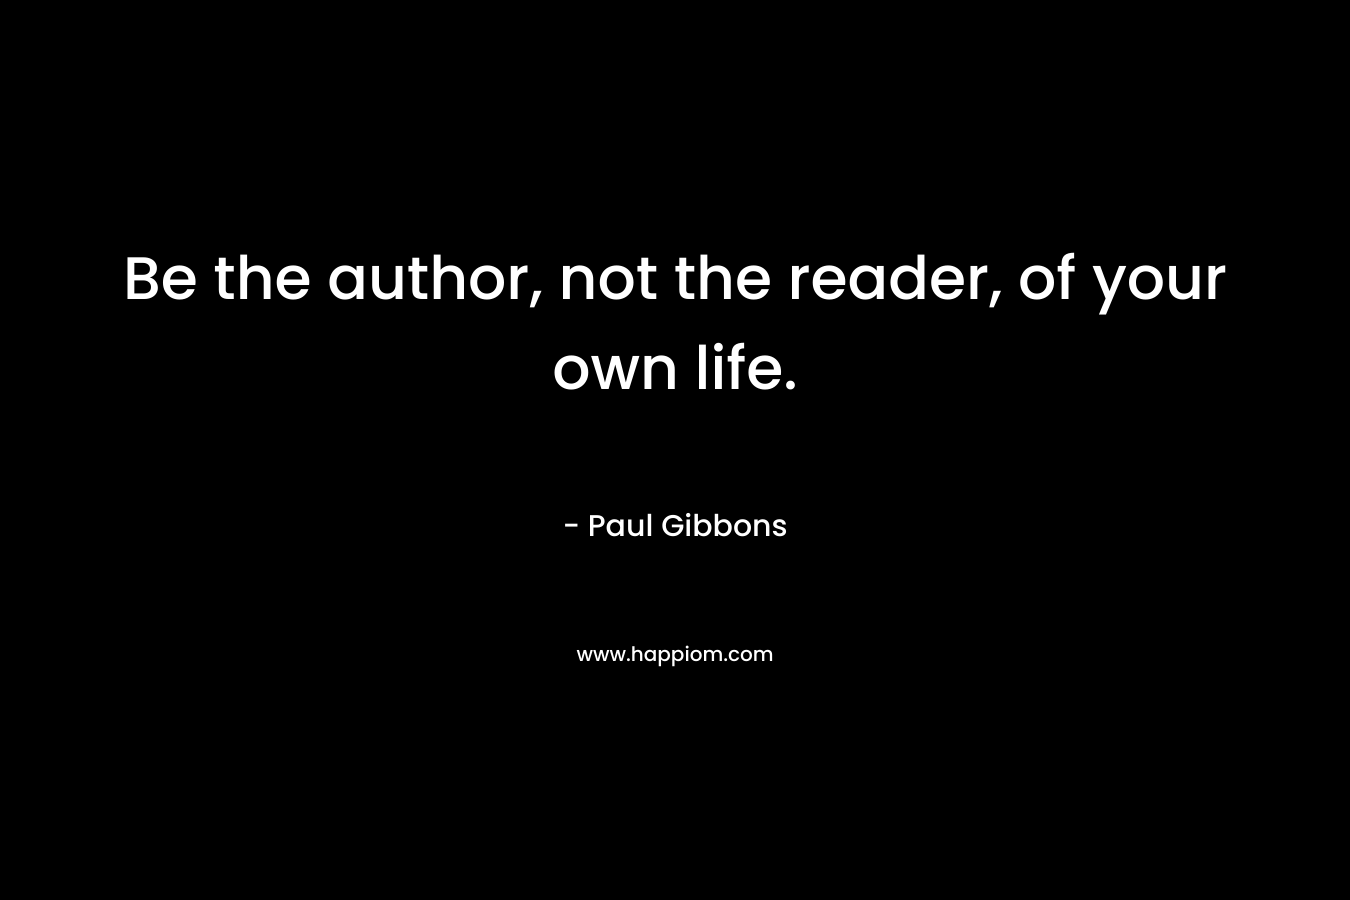 Be the author, not the reader, of your own life.